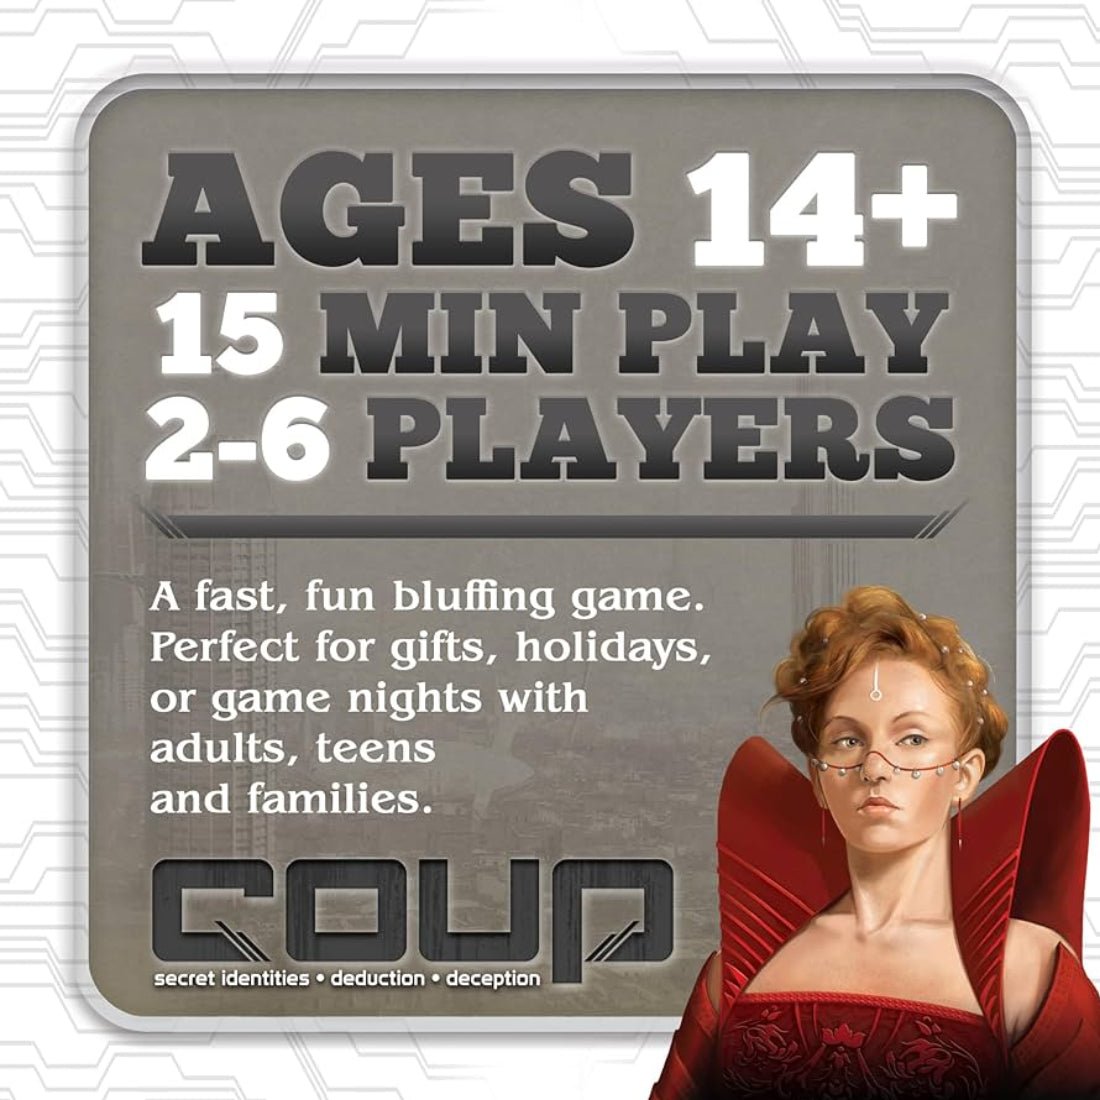 Coup: The Dystopian Card Game - لعبة - Store 974 | ستور ٩٧٤